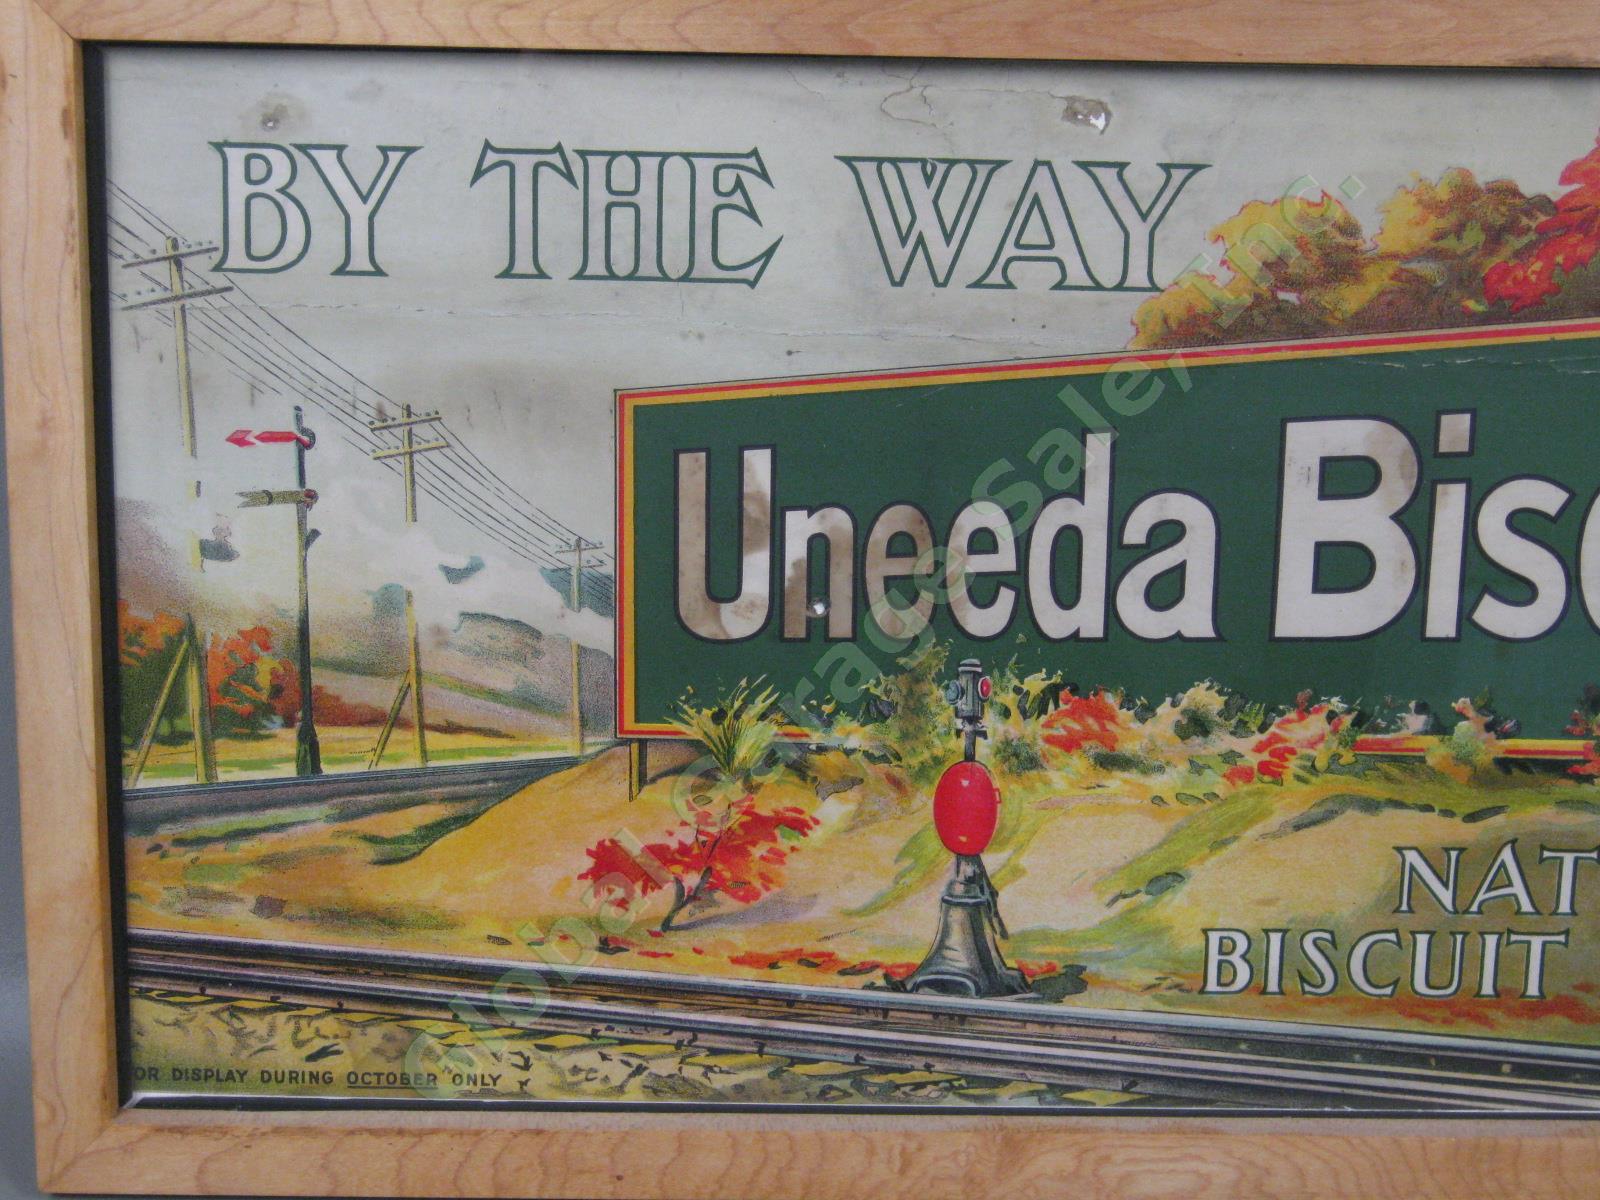 Vtg National Biscuit Co Nabisco By The Way Uneeda Advertising Sign Railroad NR! 1